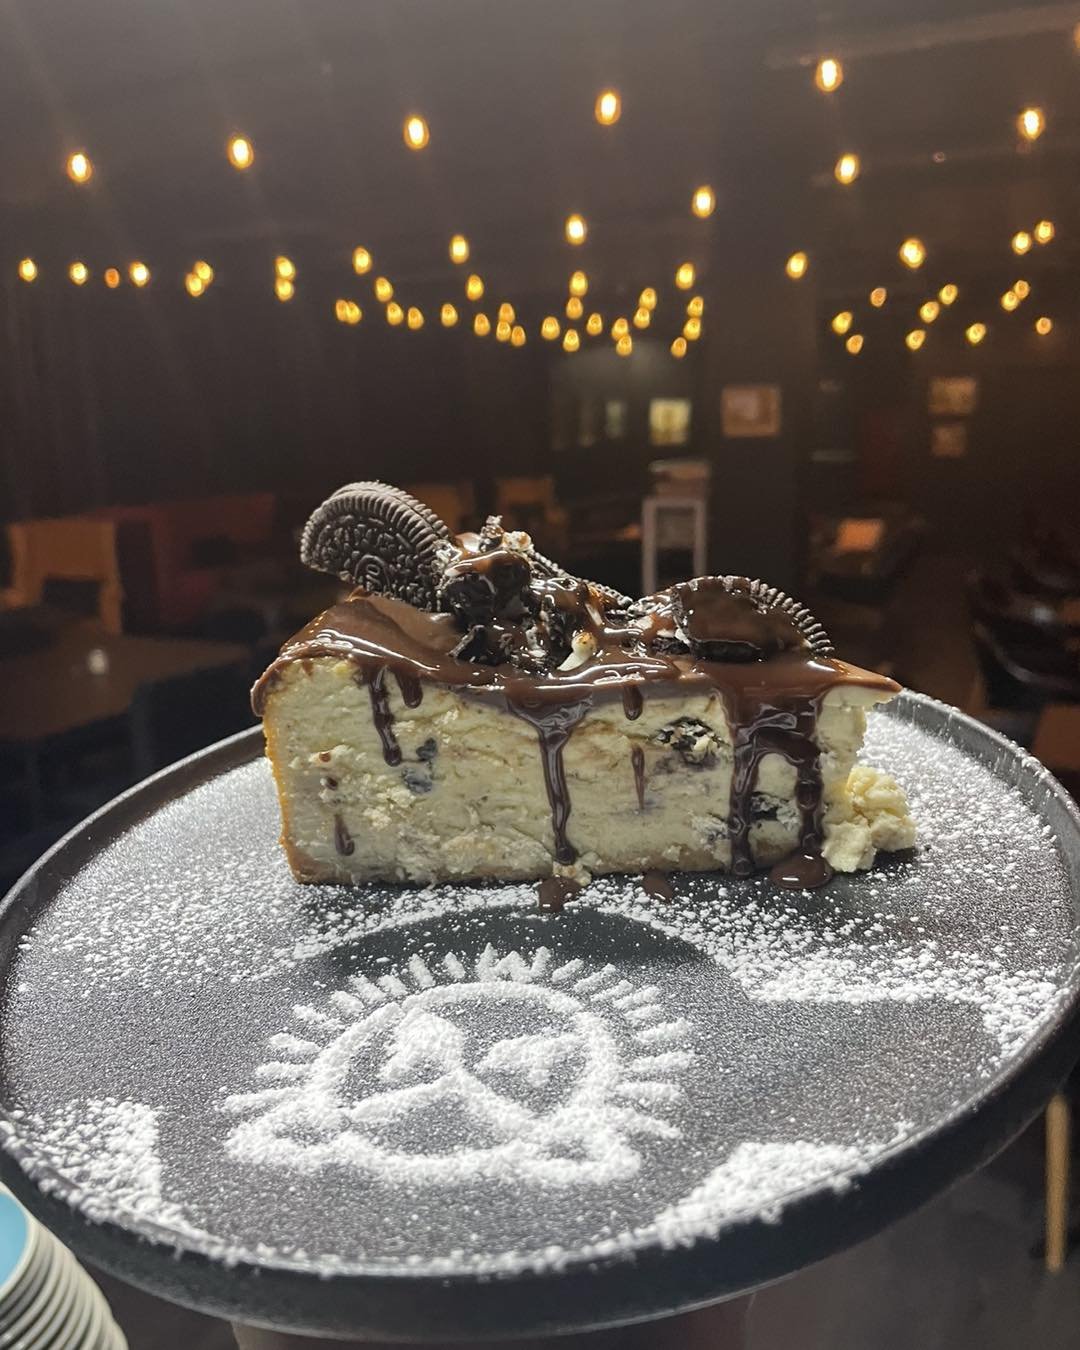 New items on the my menu tonight!
Including this Oreo baked cheesecake.

Open 6 til 11pm 
101 little Malop st